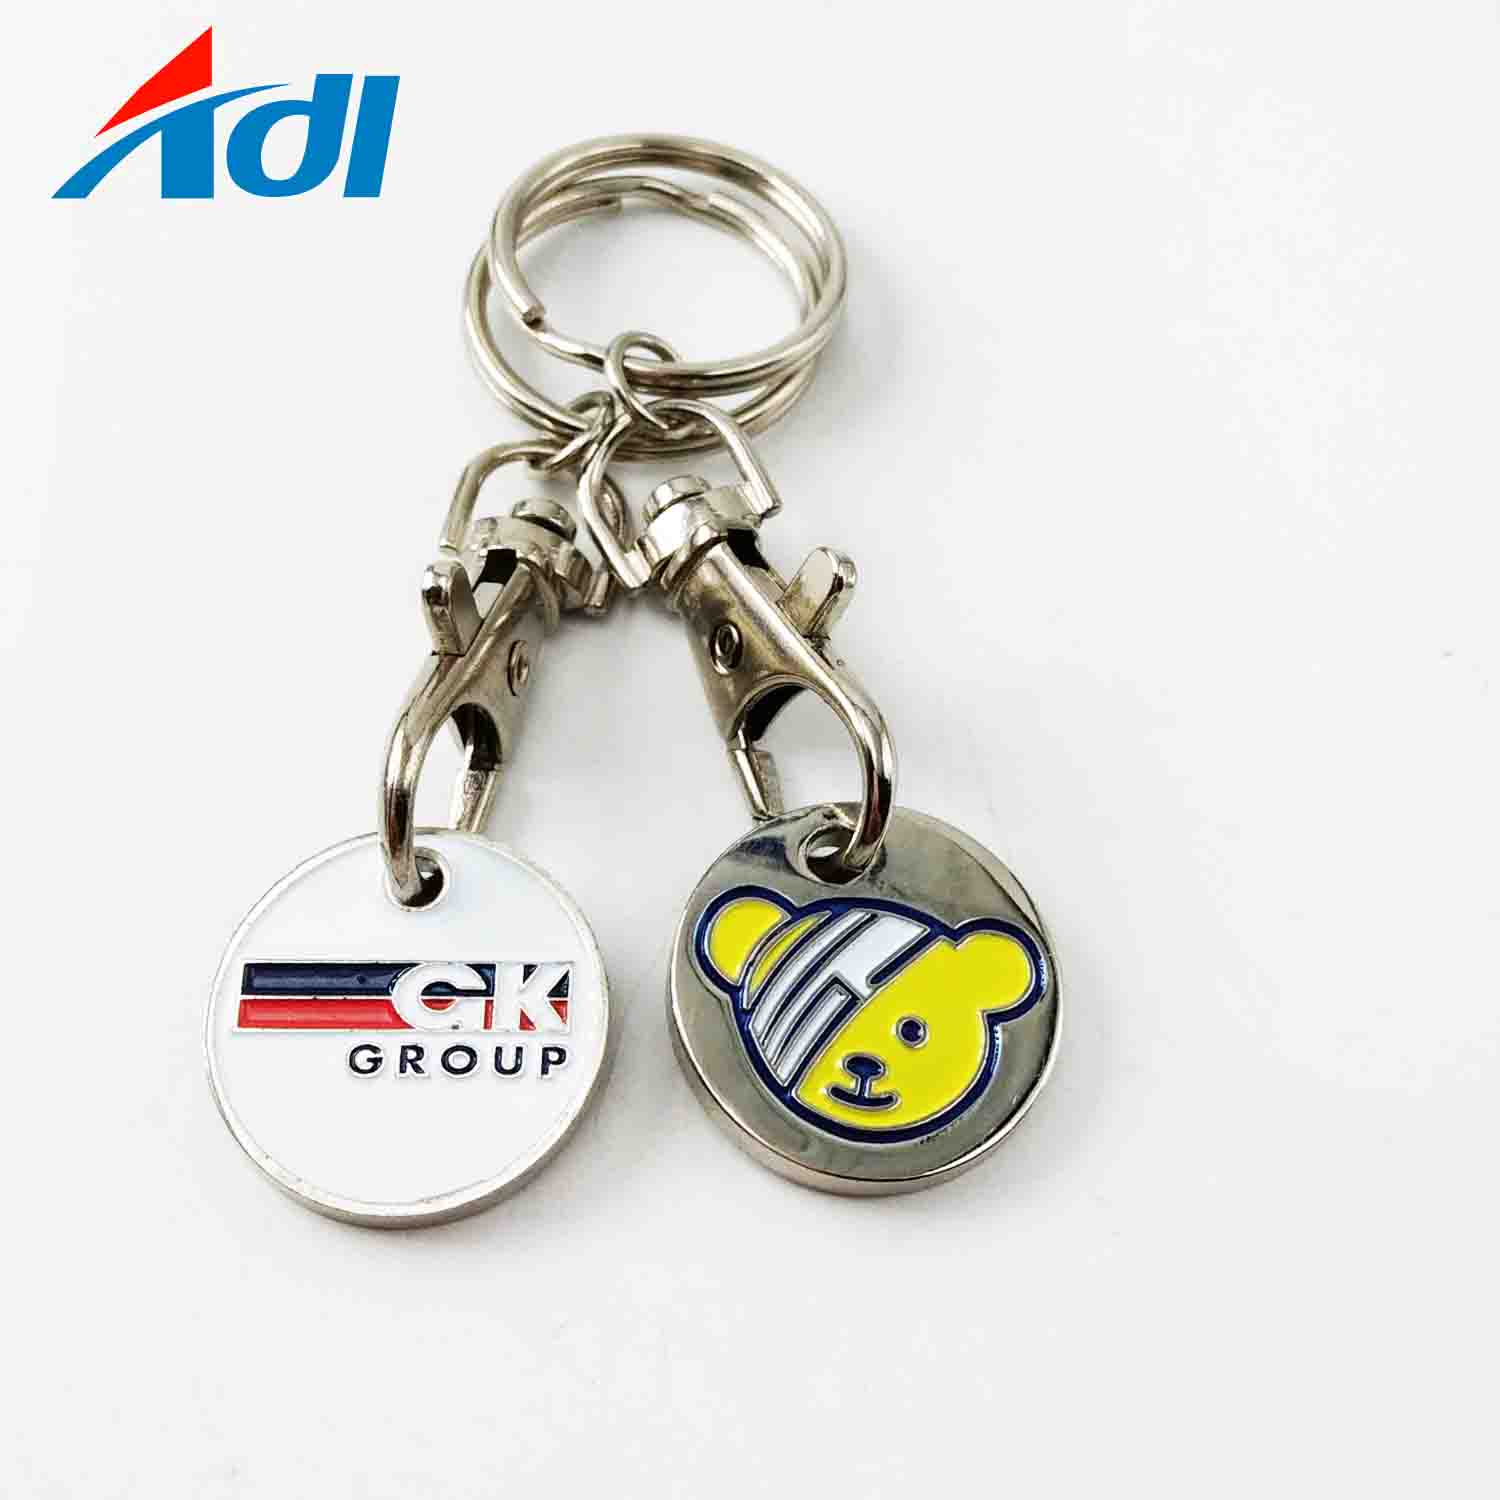 TROLLEY COIN TOKEN KEYRING PERSONALISED PHOTO PROMOTIONAL BUSINESS LOGO GIFT 